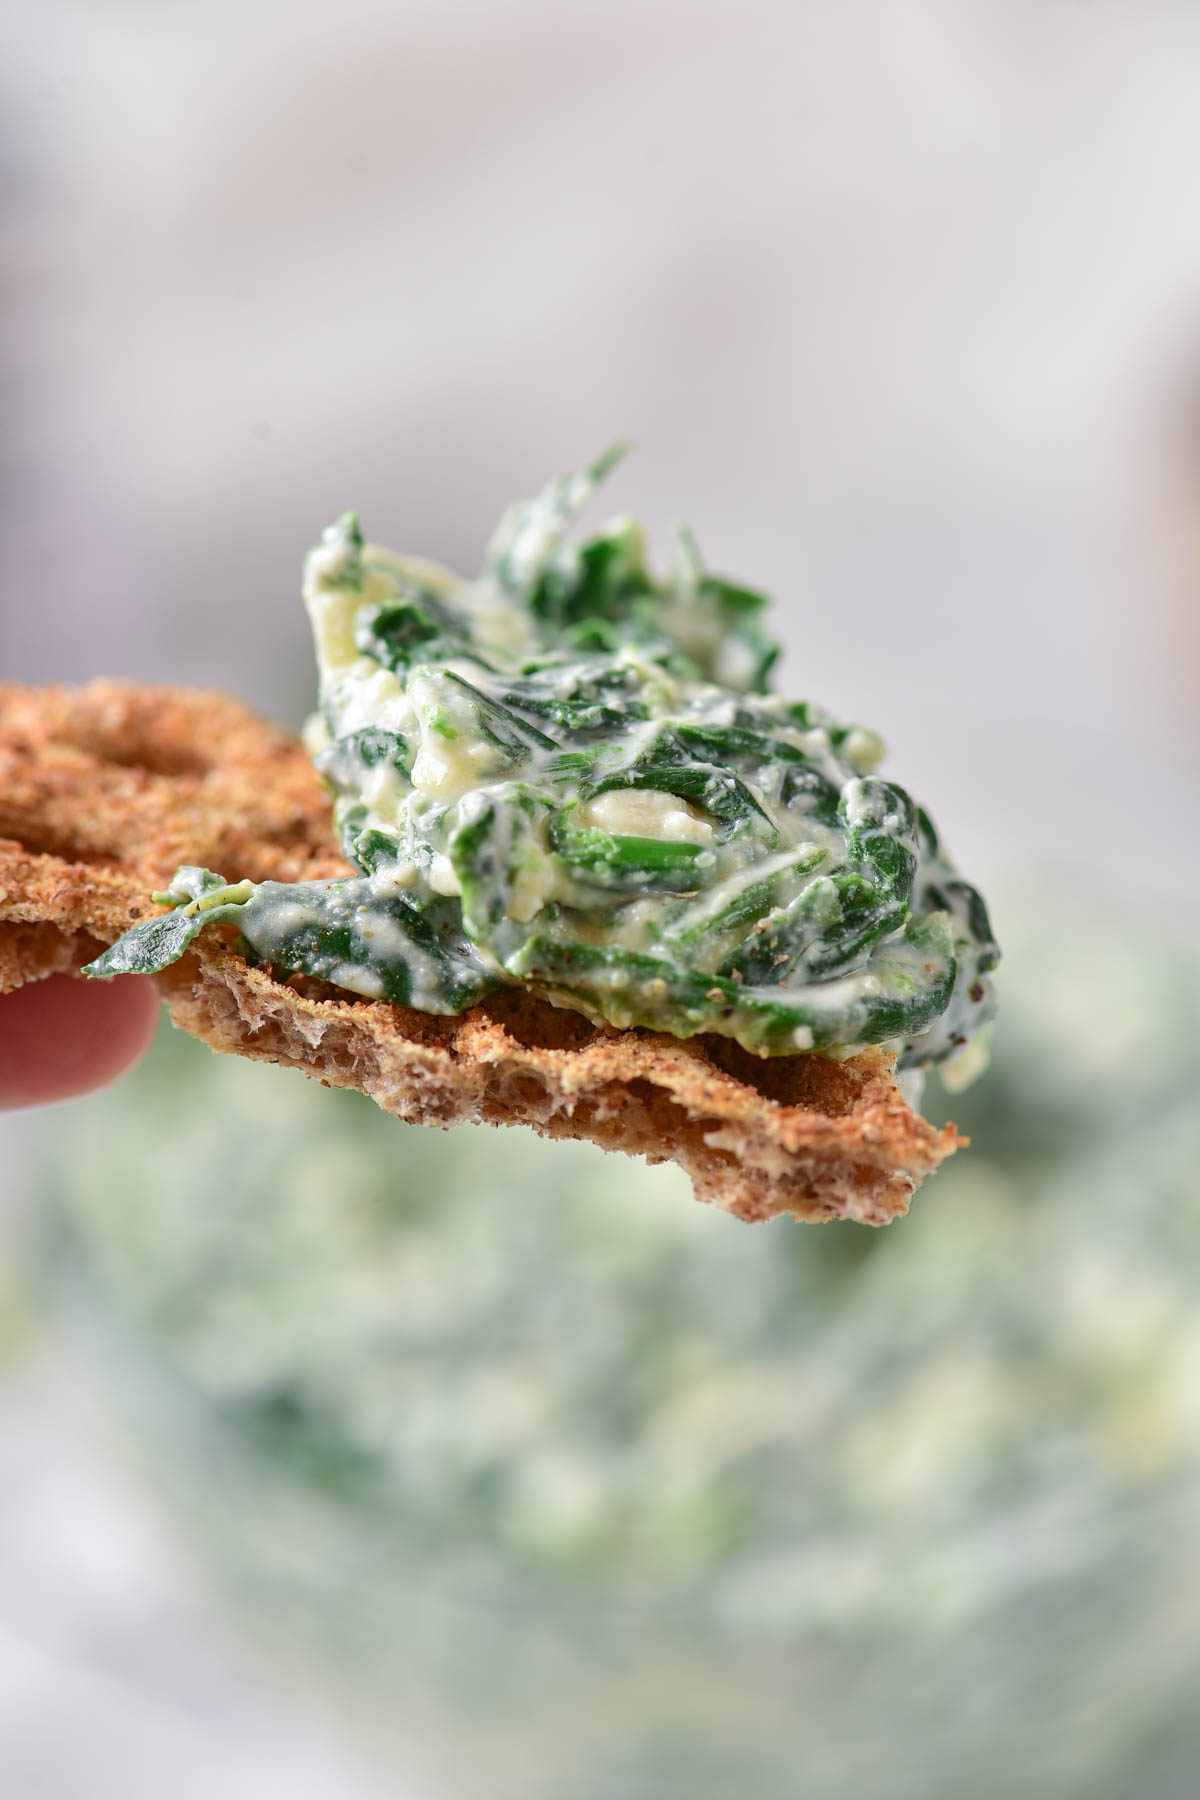 Cracker with spinach dip